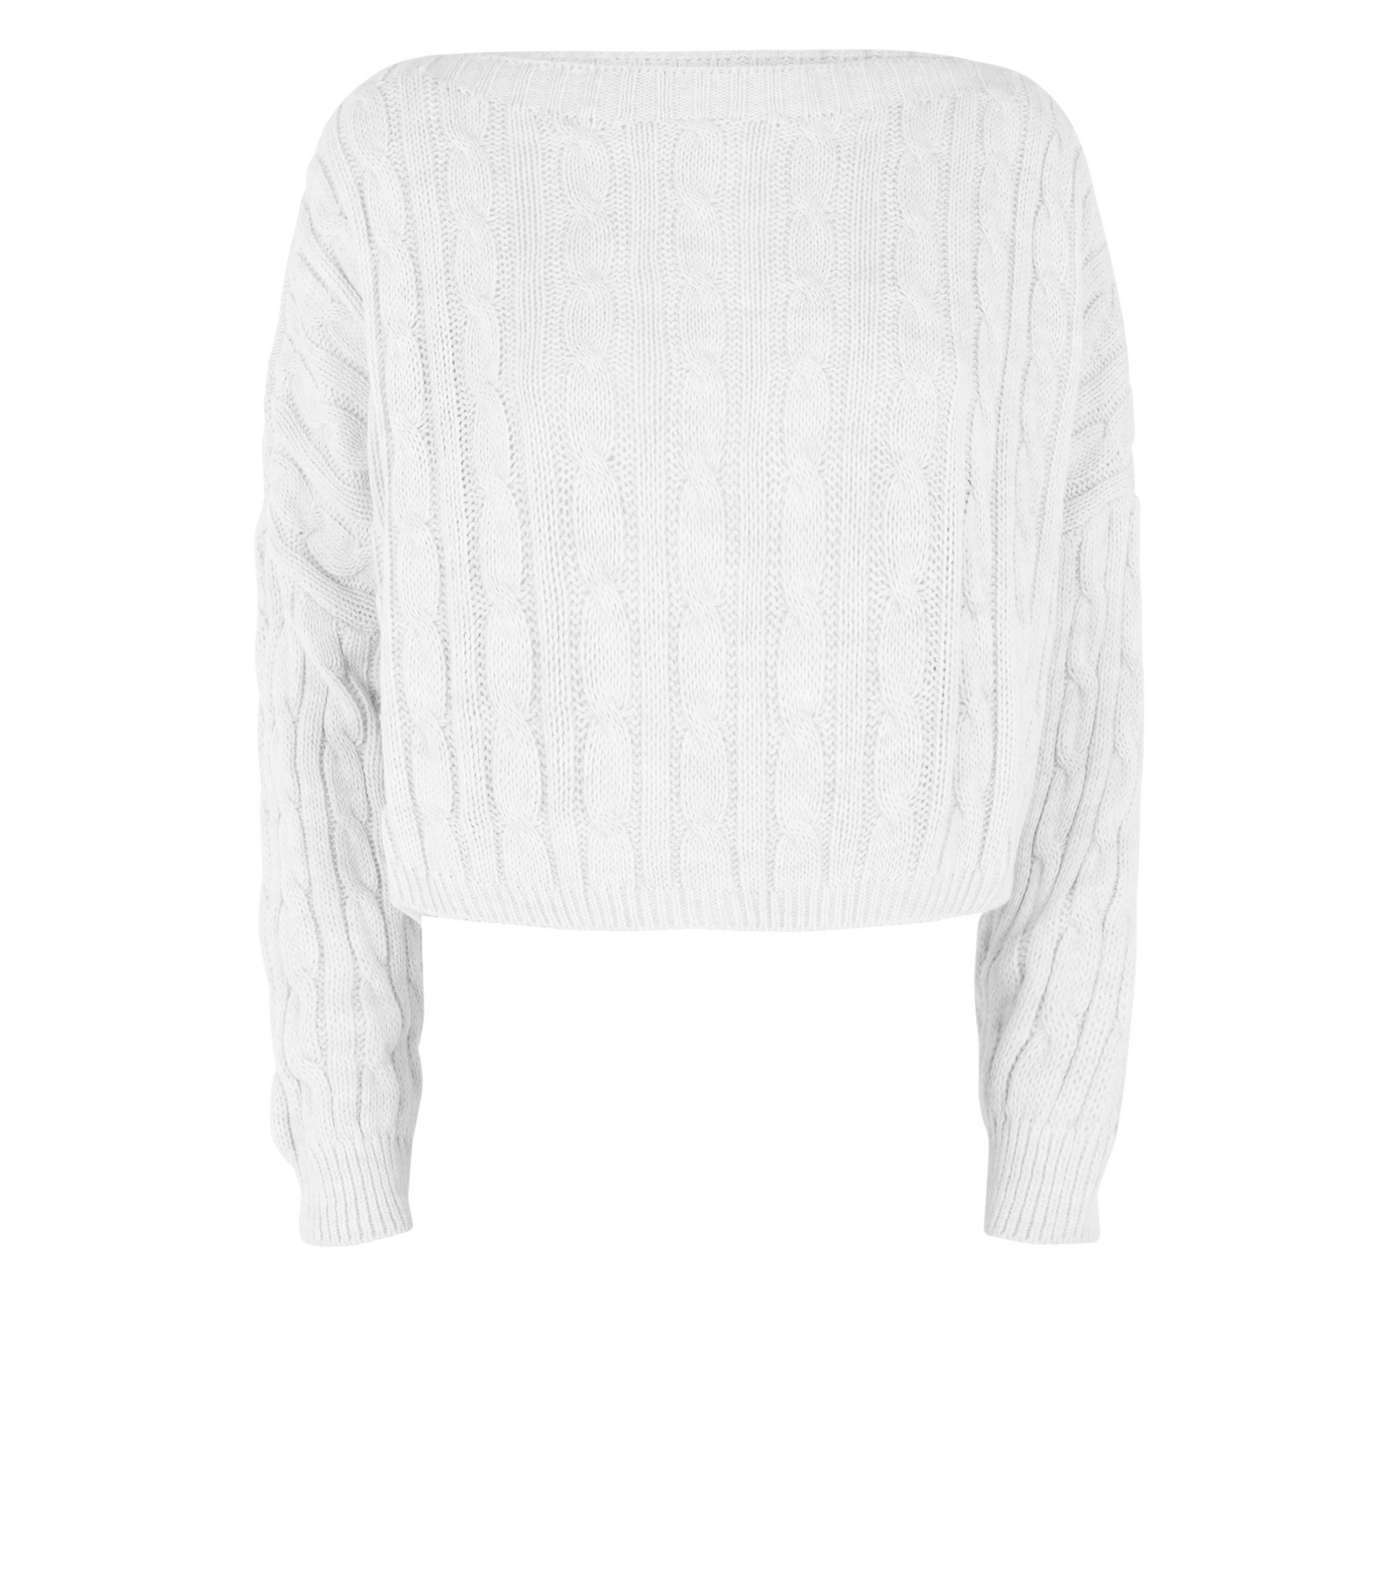 Cameo Rose Cream Cable Knit Jumper Image 4